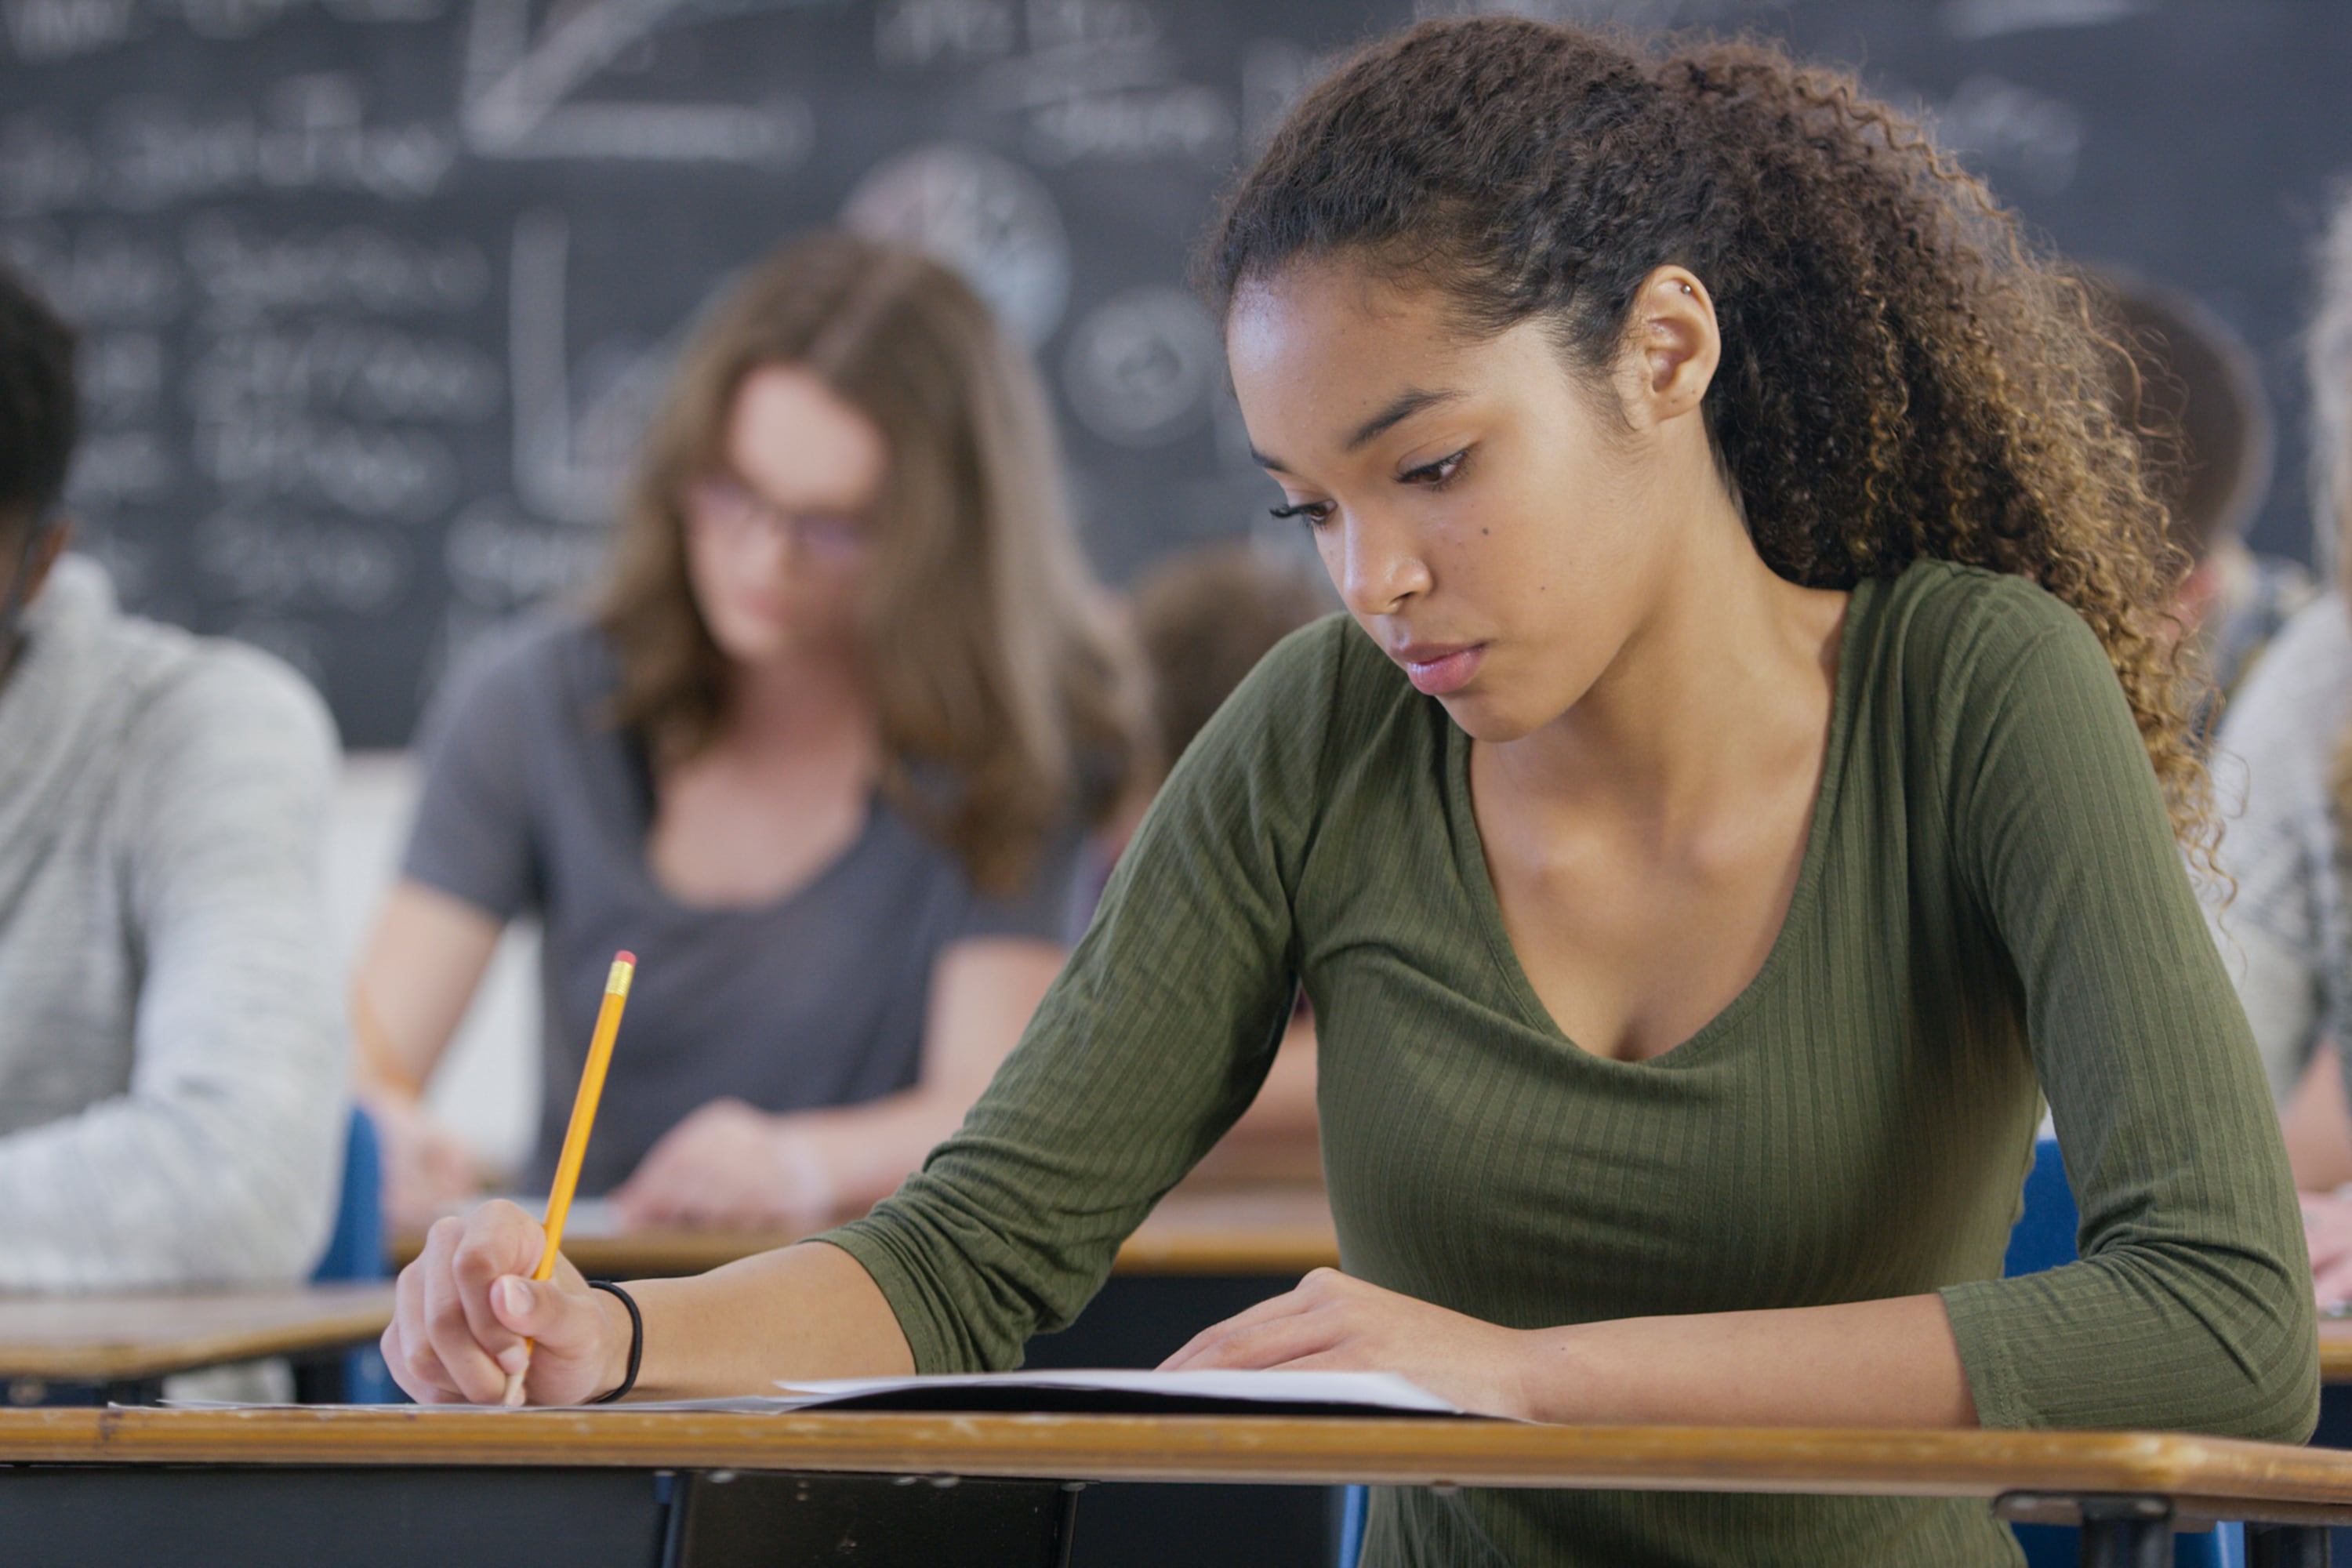 A high school girl wearing a green shirt sits at a desk taking a test with two students in the background.